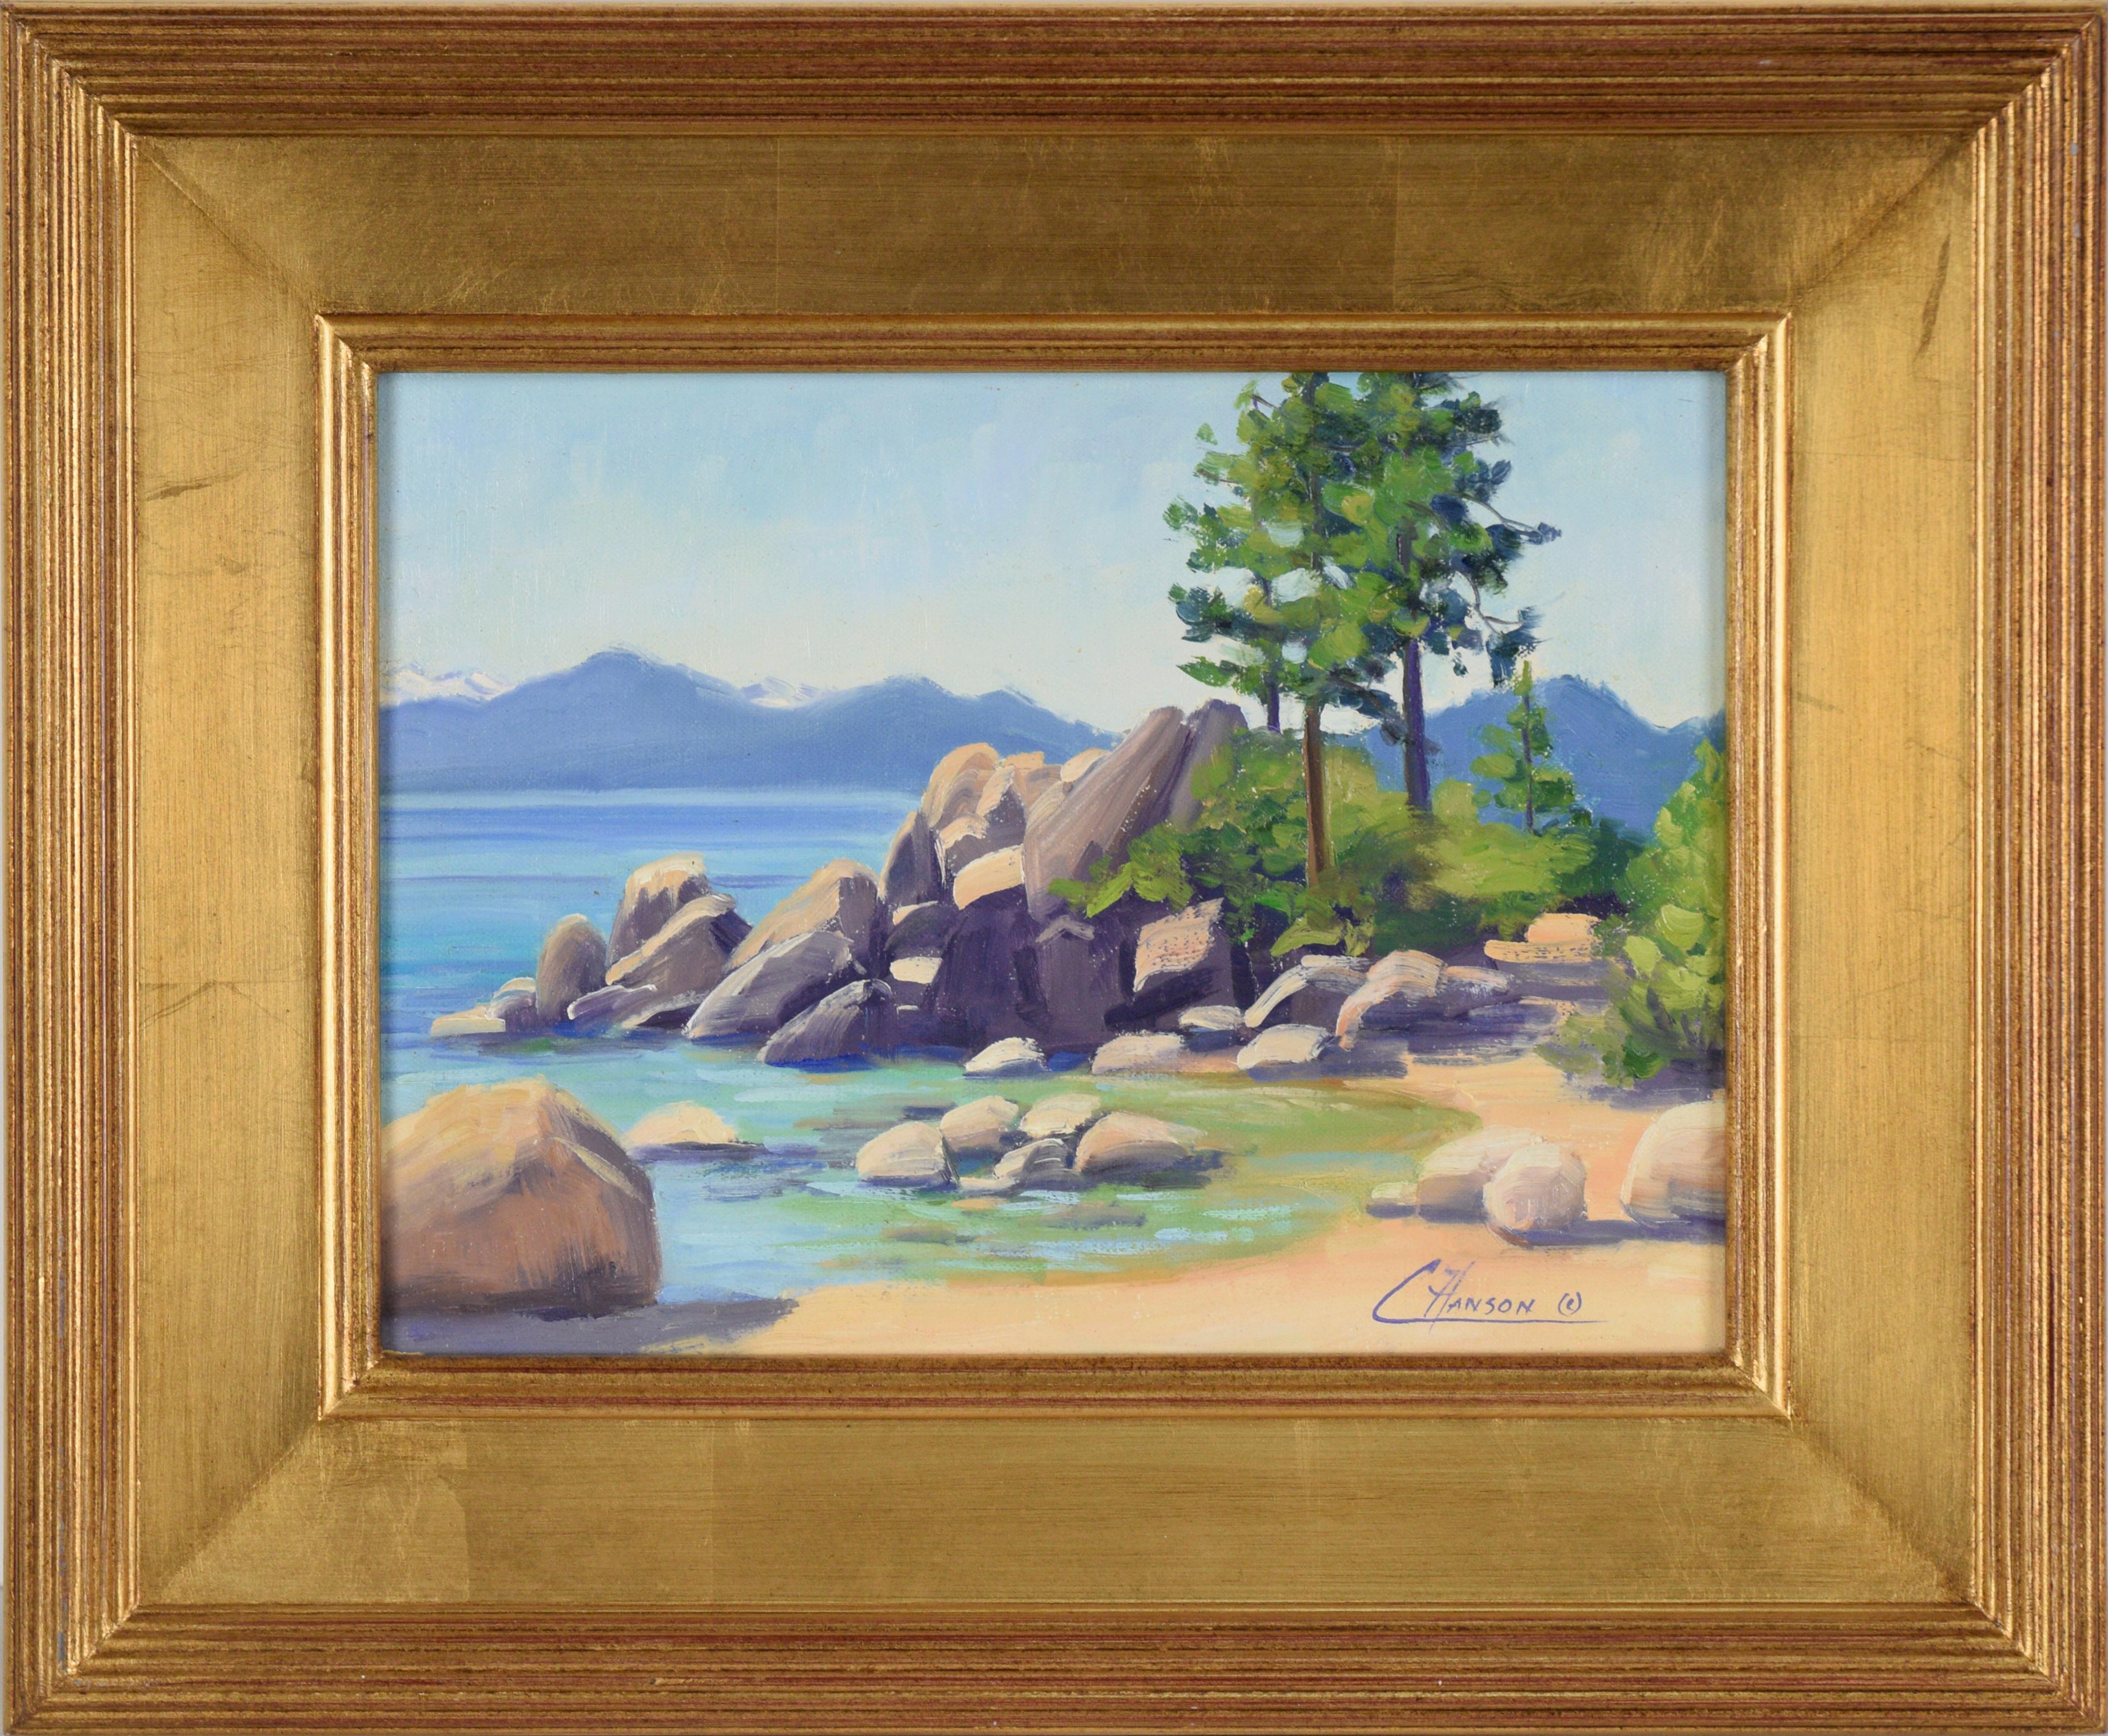 Coraly Hanson Landscape Painting - "Sand Harbor" - Rocky Seascape in Oil on Linen